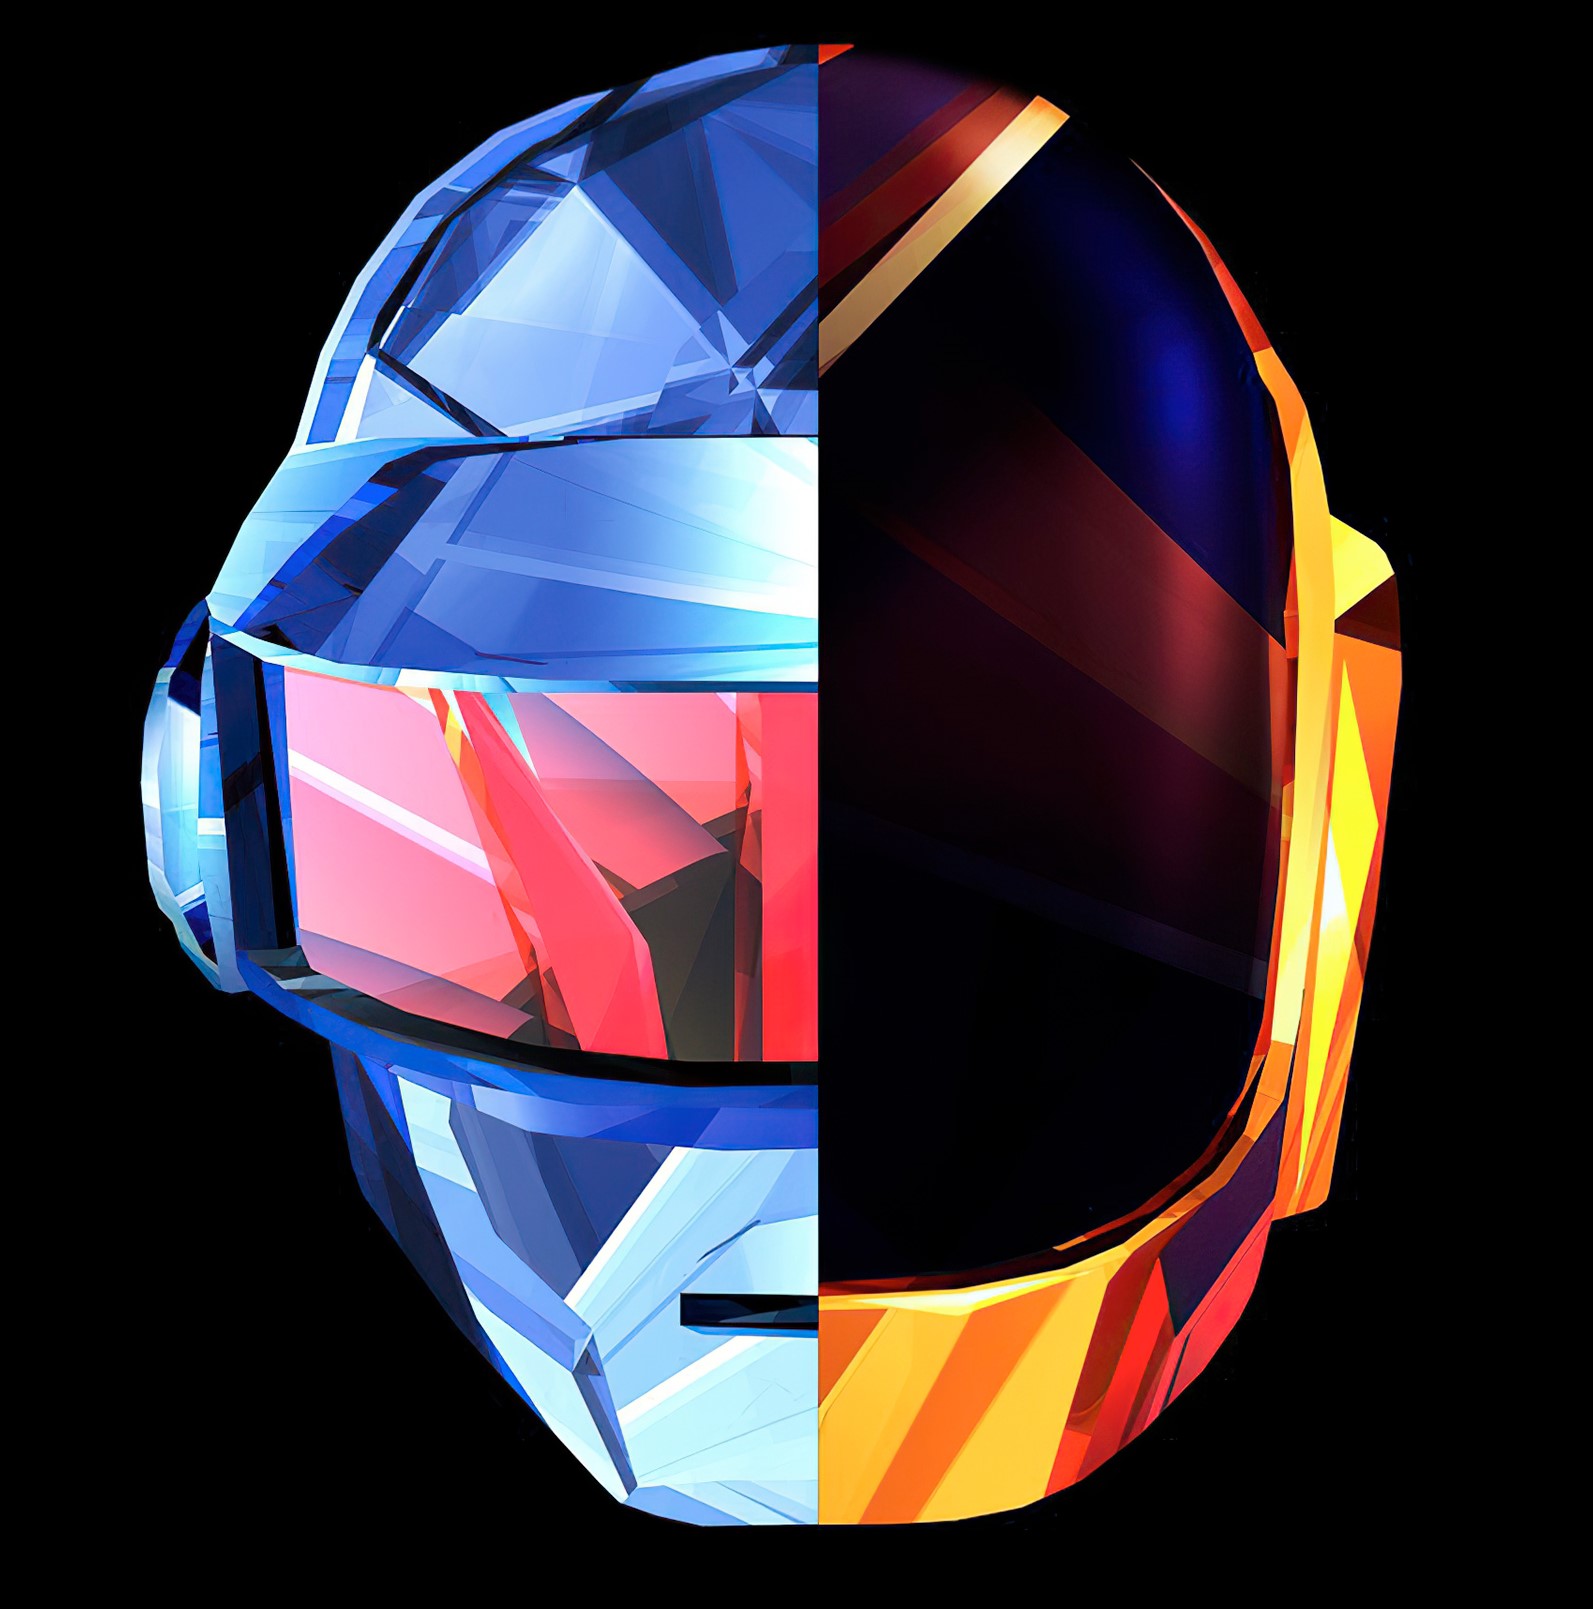 Image of an HTML project on Daft Punk